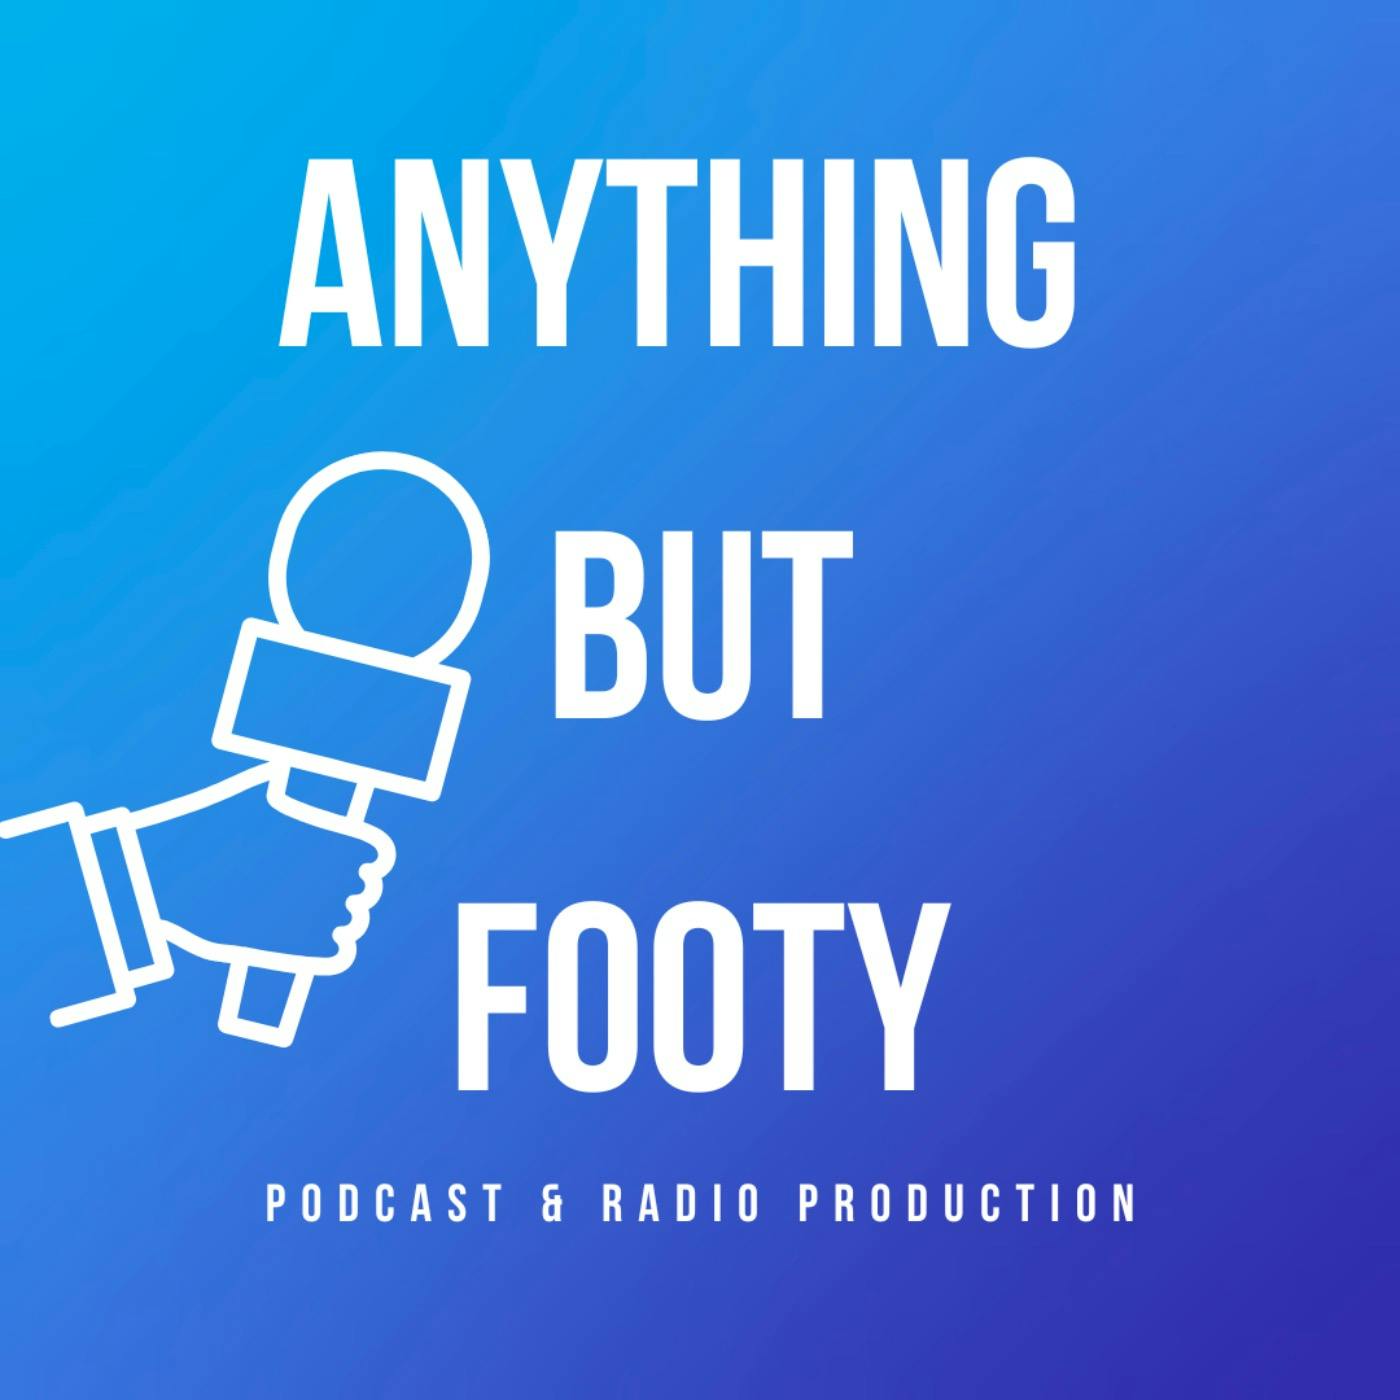 Anything but Footy:Anything but Footy